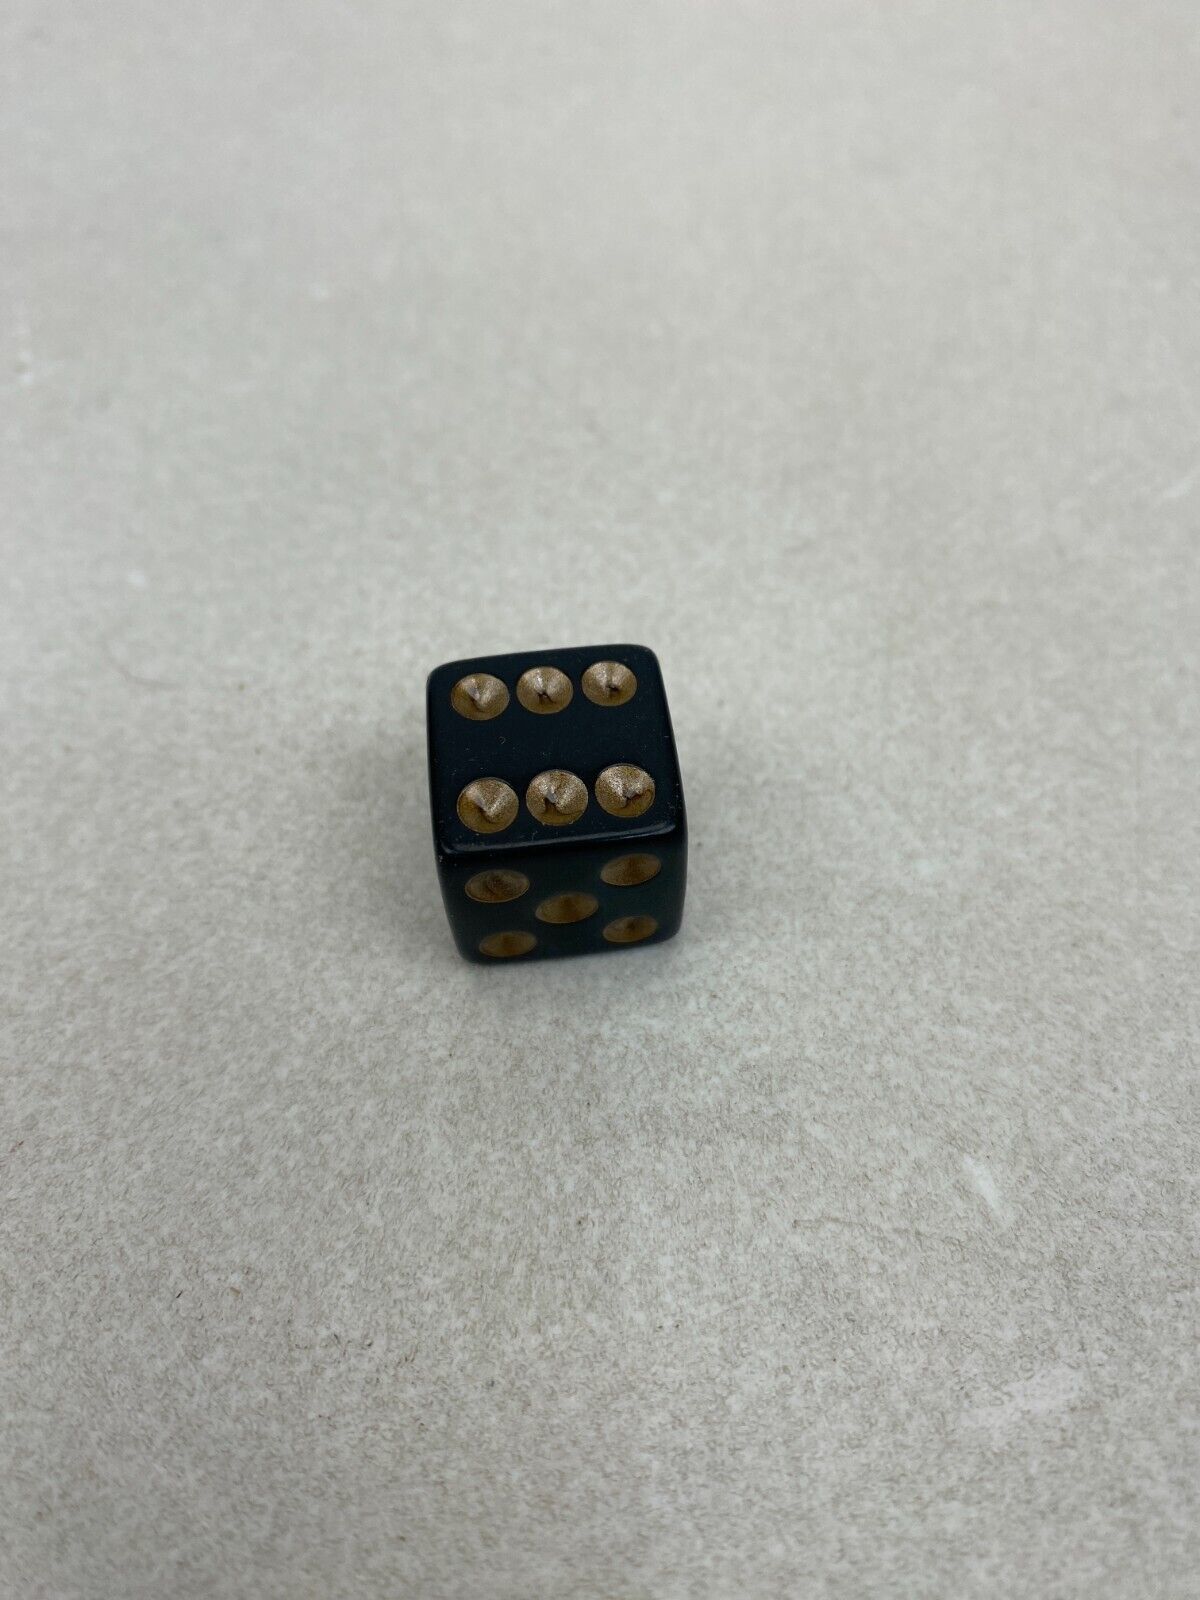 Primary image for 2013 Monopoly Empire Black Dice Replacement Parts